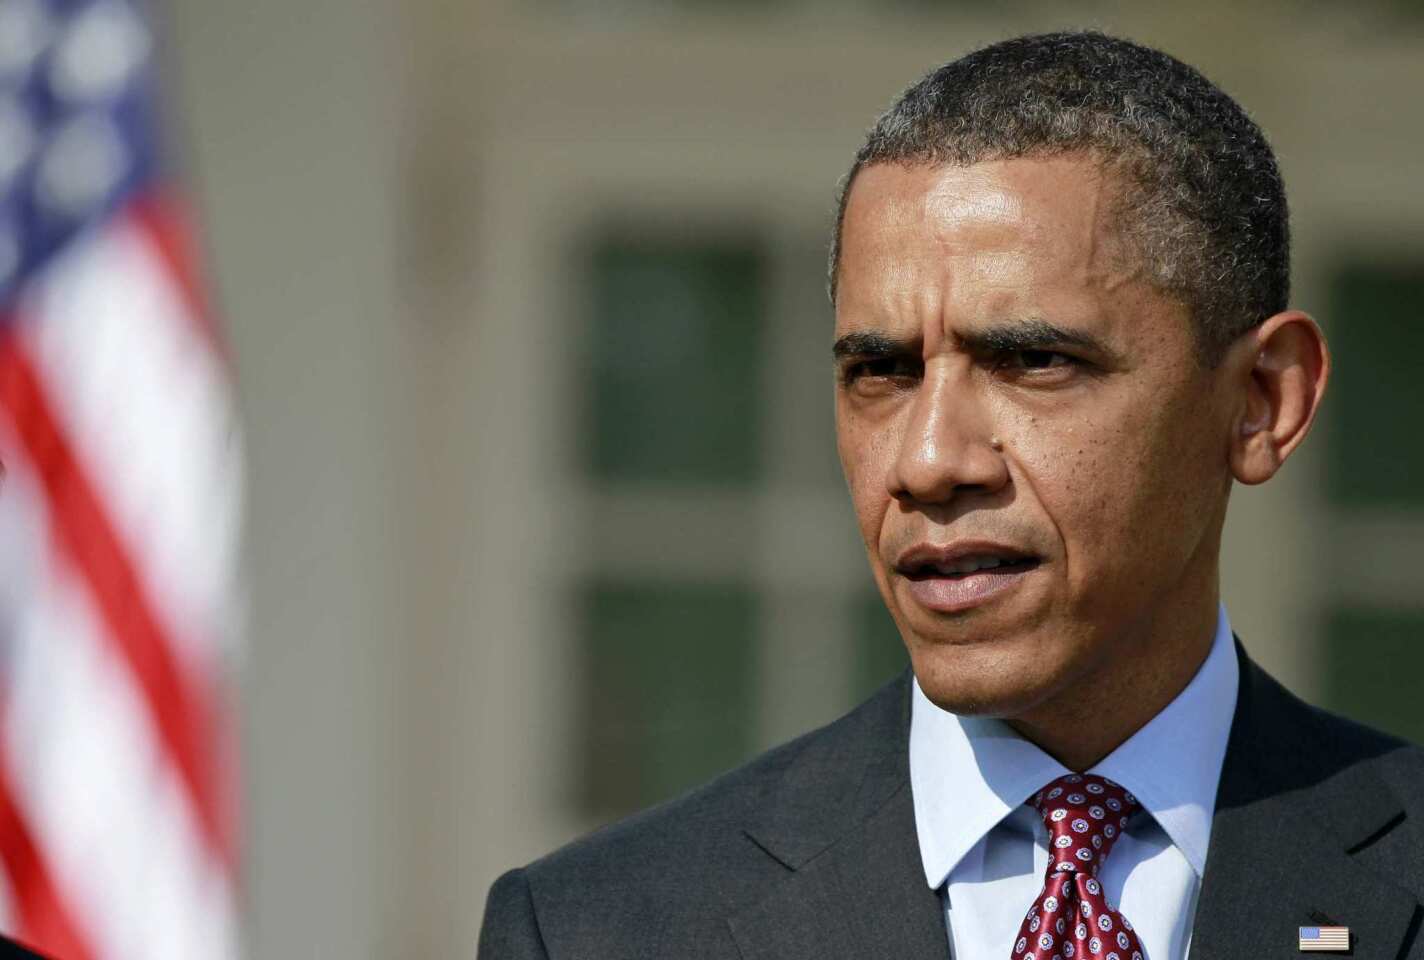 President Obama: 'If I had a son, he would look like Trayvon'